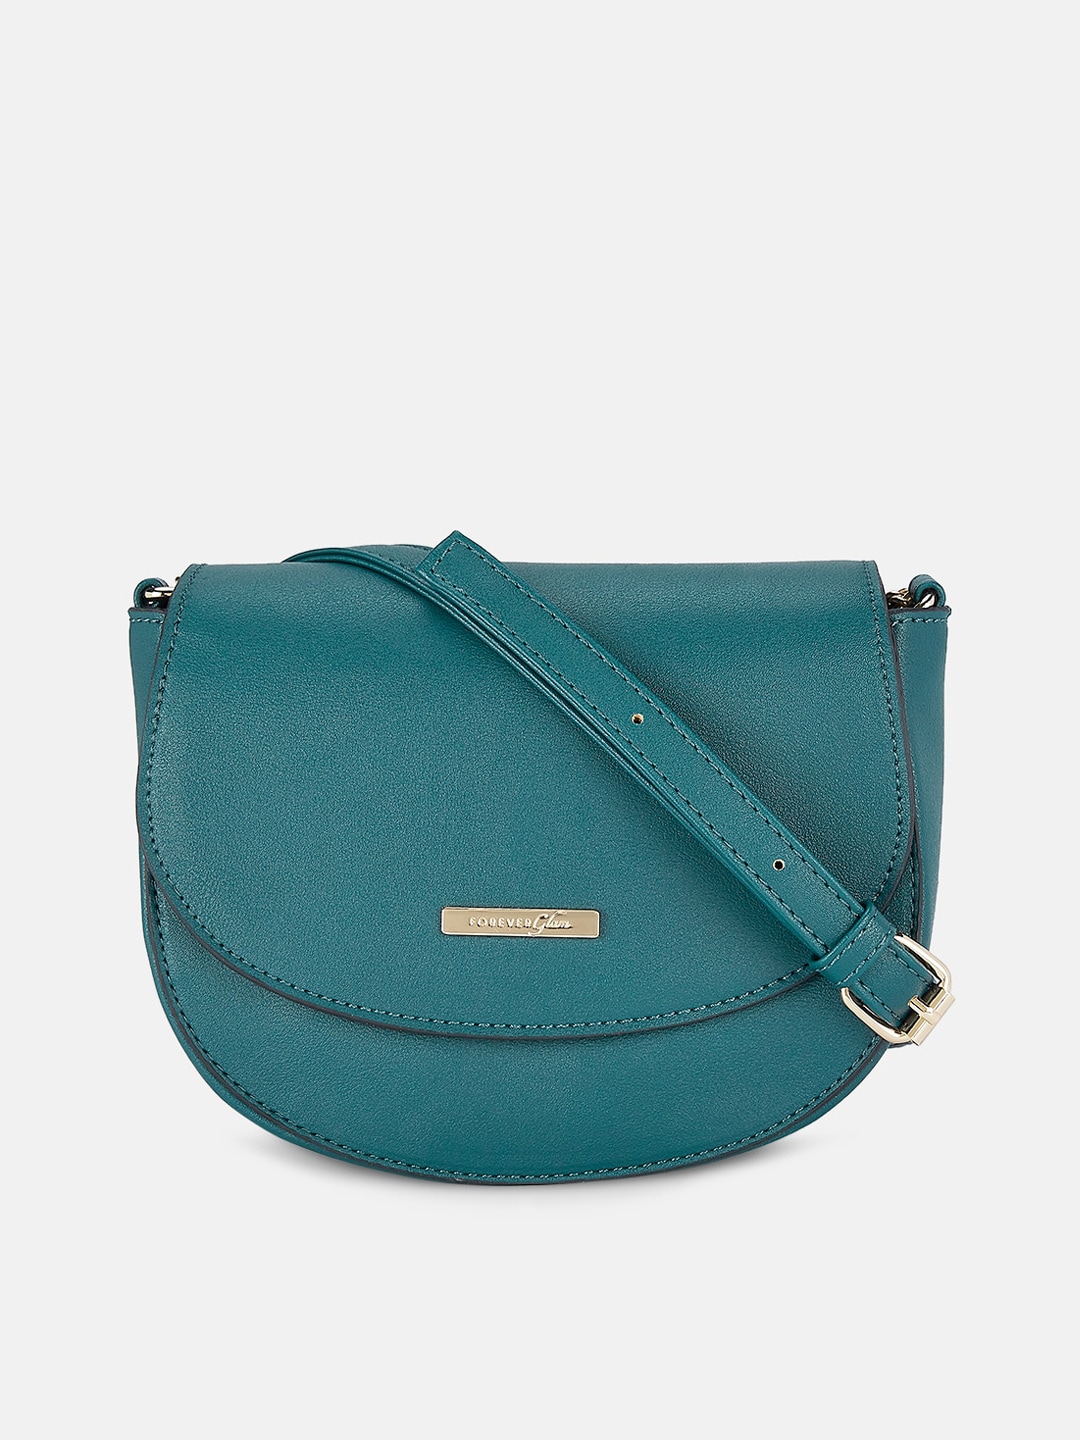 Forever Glam by Pantaloons Teal Blue Structured Faux Leather Sling Bag Price in India